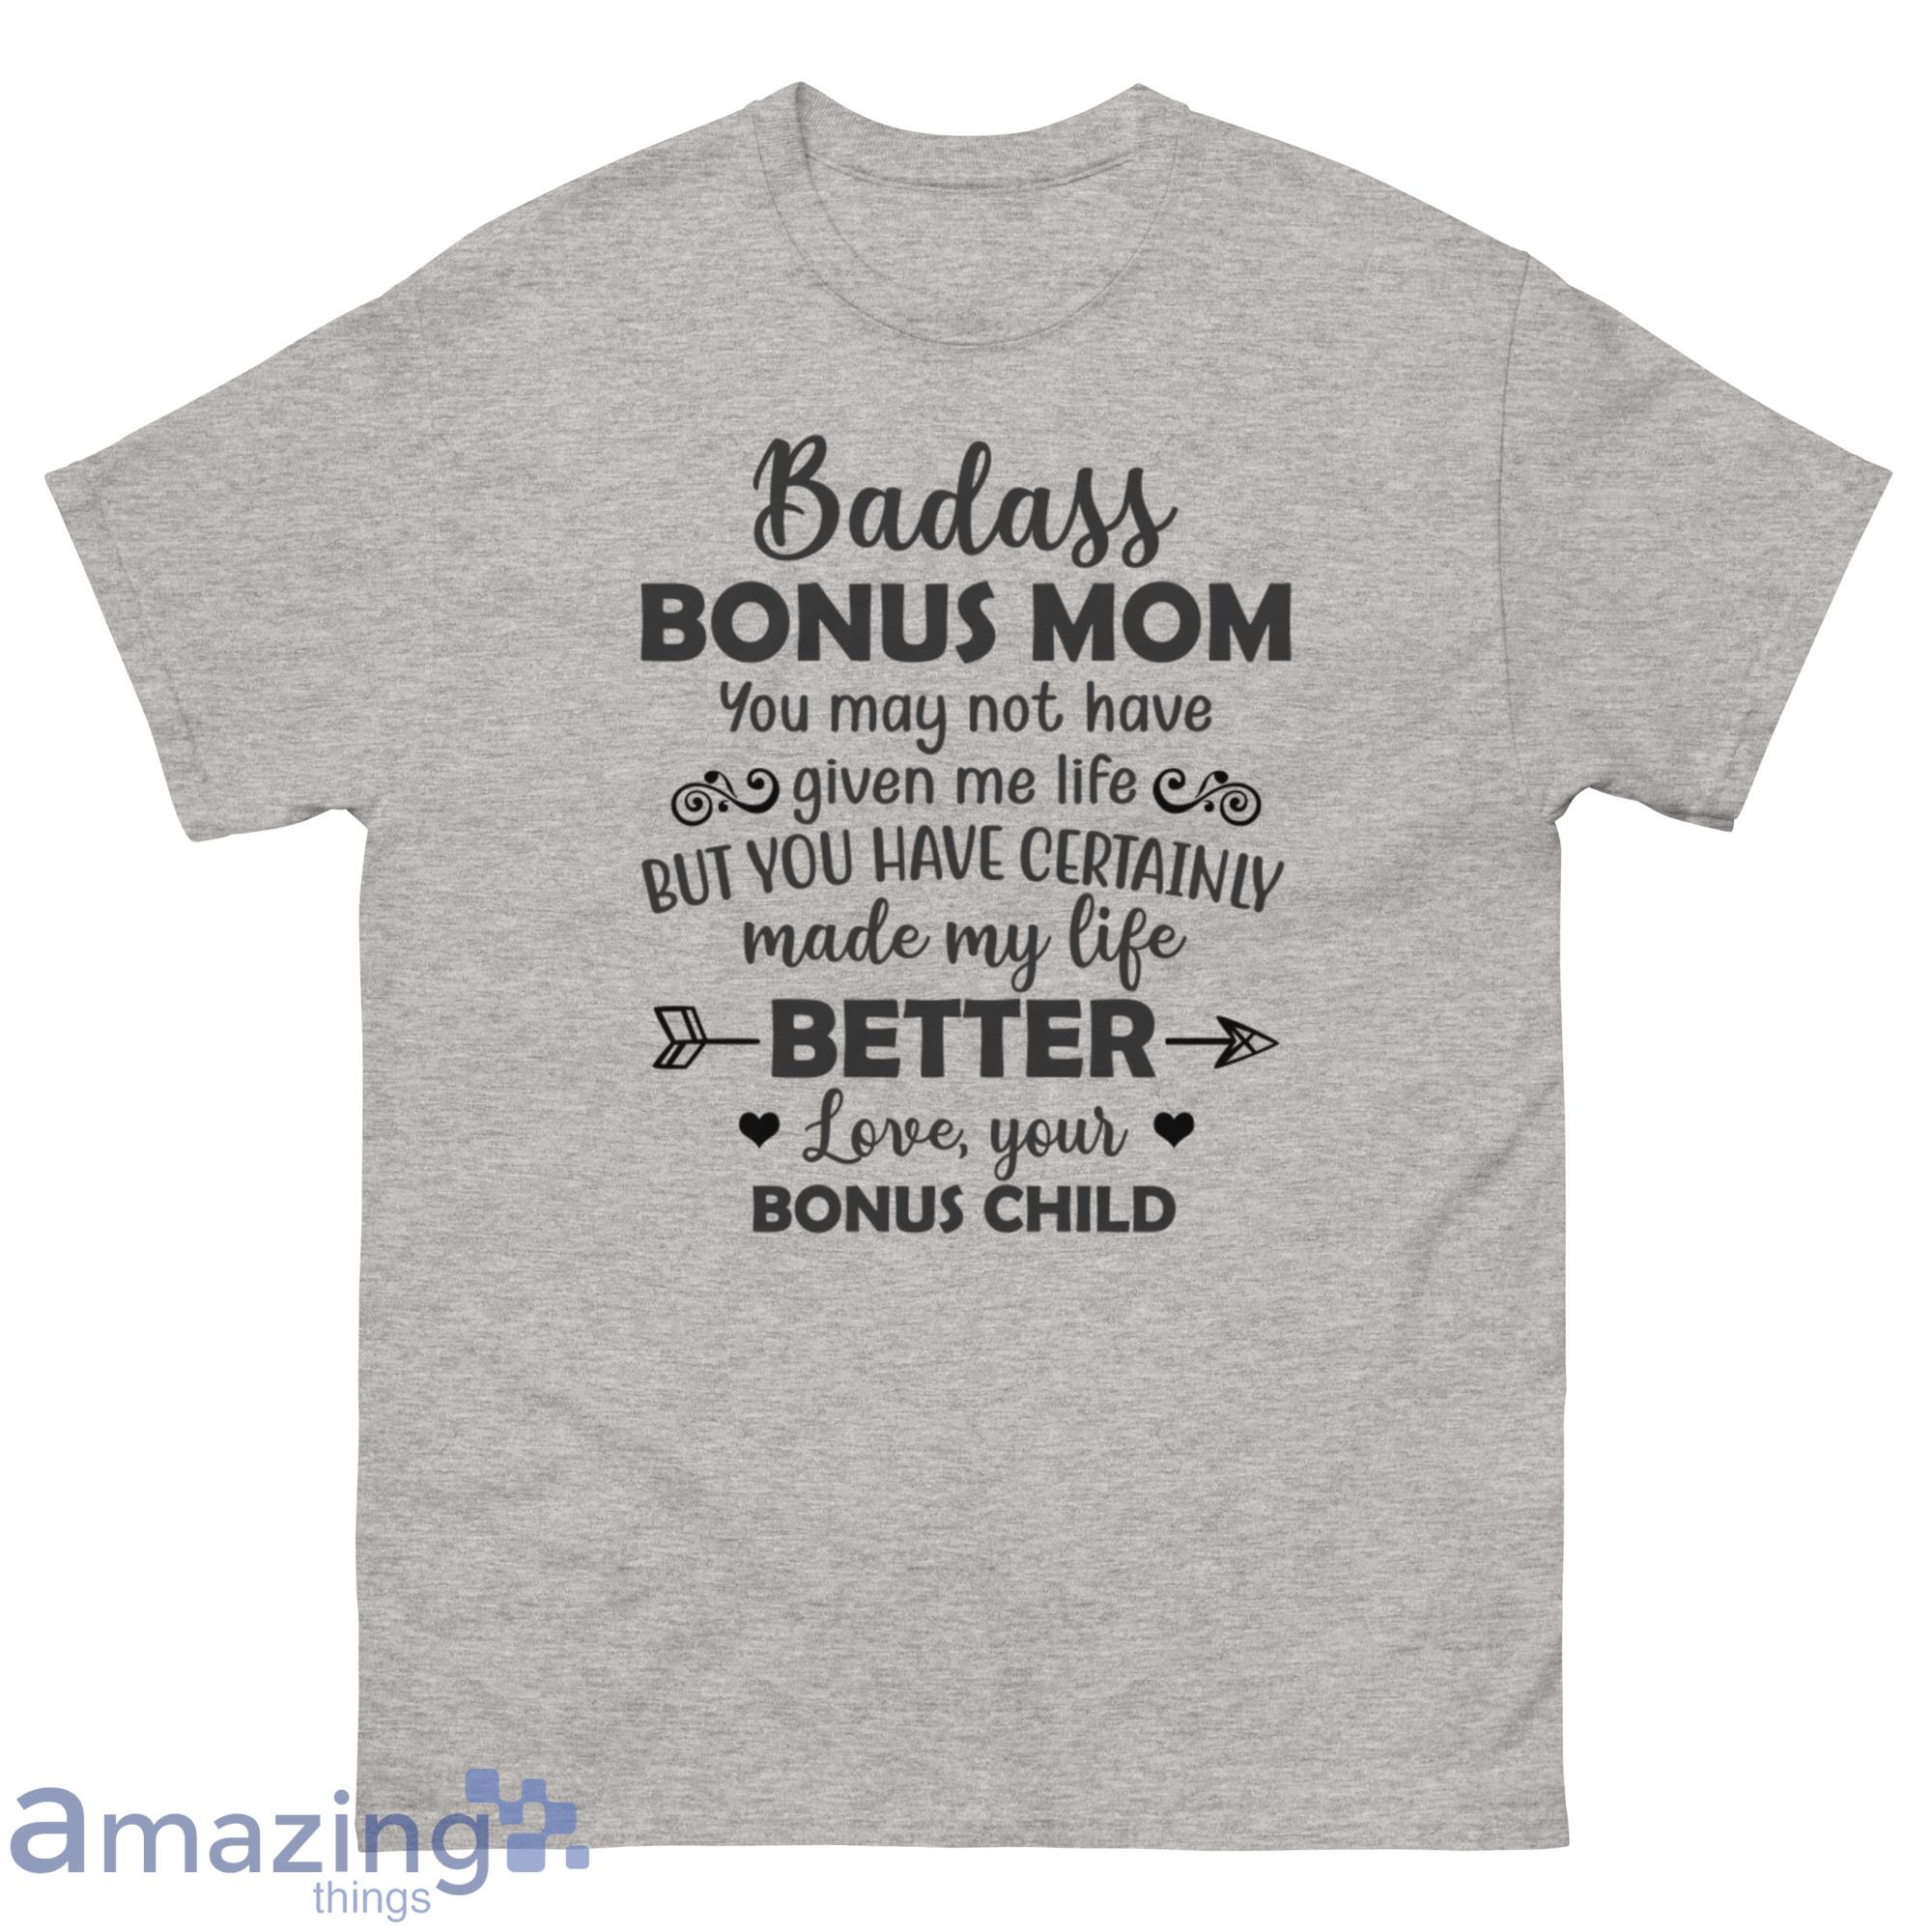 Badass Bonus Mom, You May Not Have Given Me Life But You Made My Life Shirt - G500 Men’s Classic T-Shirt